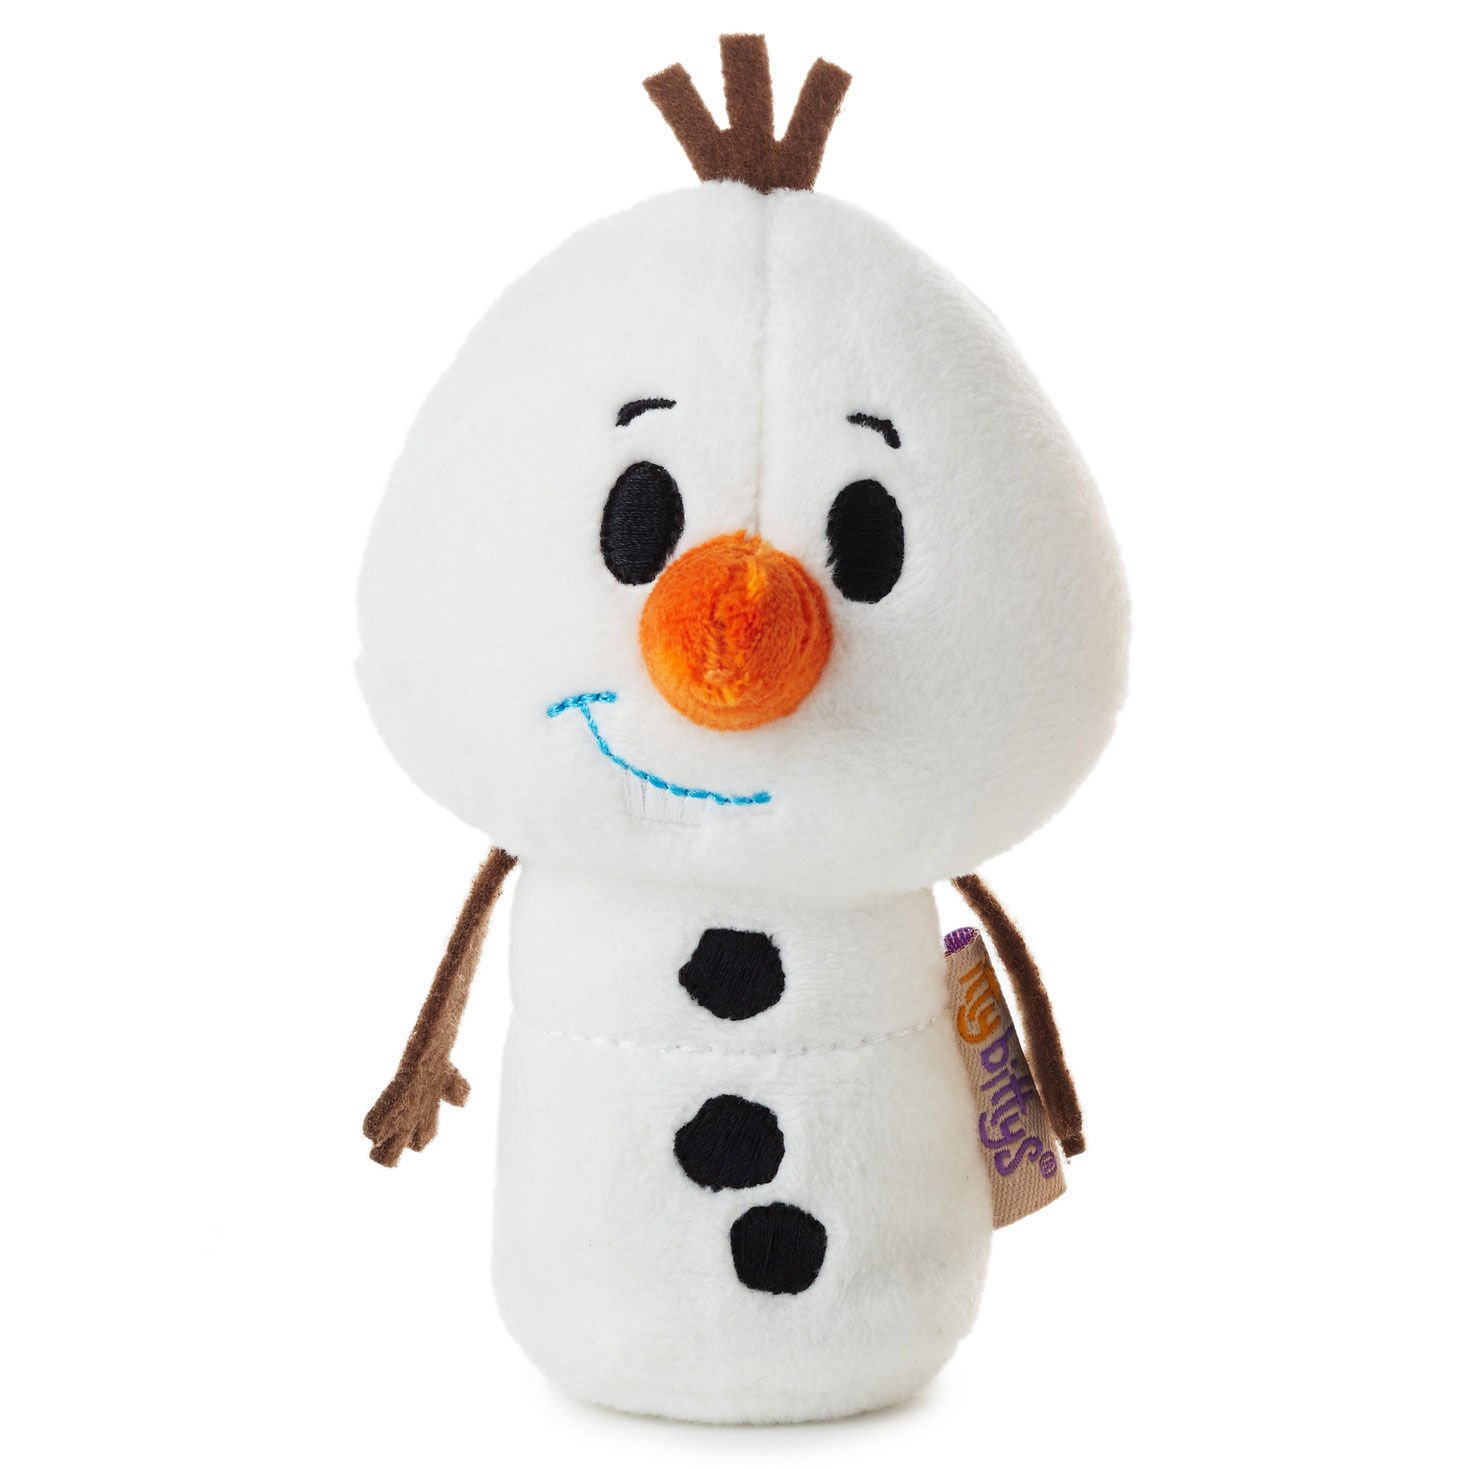 https://www.hallmark.com/dw/image/v2/AALB_PRD/on/demandware.static/-/Sites-hallmark-master/default/dw67a3c5a5/images/finished-goods/products/1KDD2164/Disney-Frozen-2-Olaf-Plush-With-Sound-itty-bittys_1KDD2164_01.jpg?sfrm=jpg